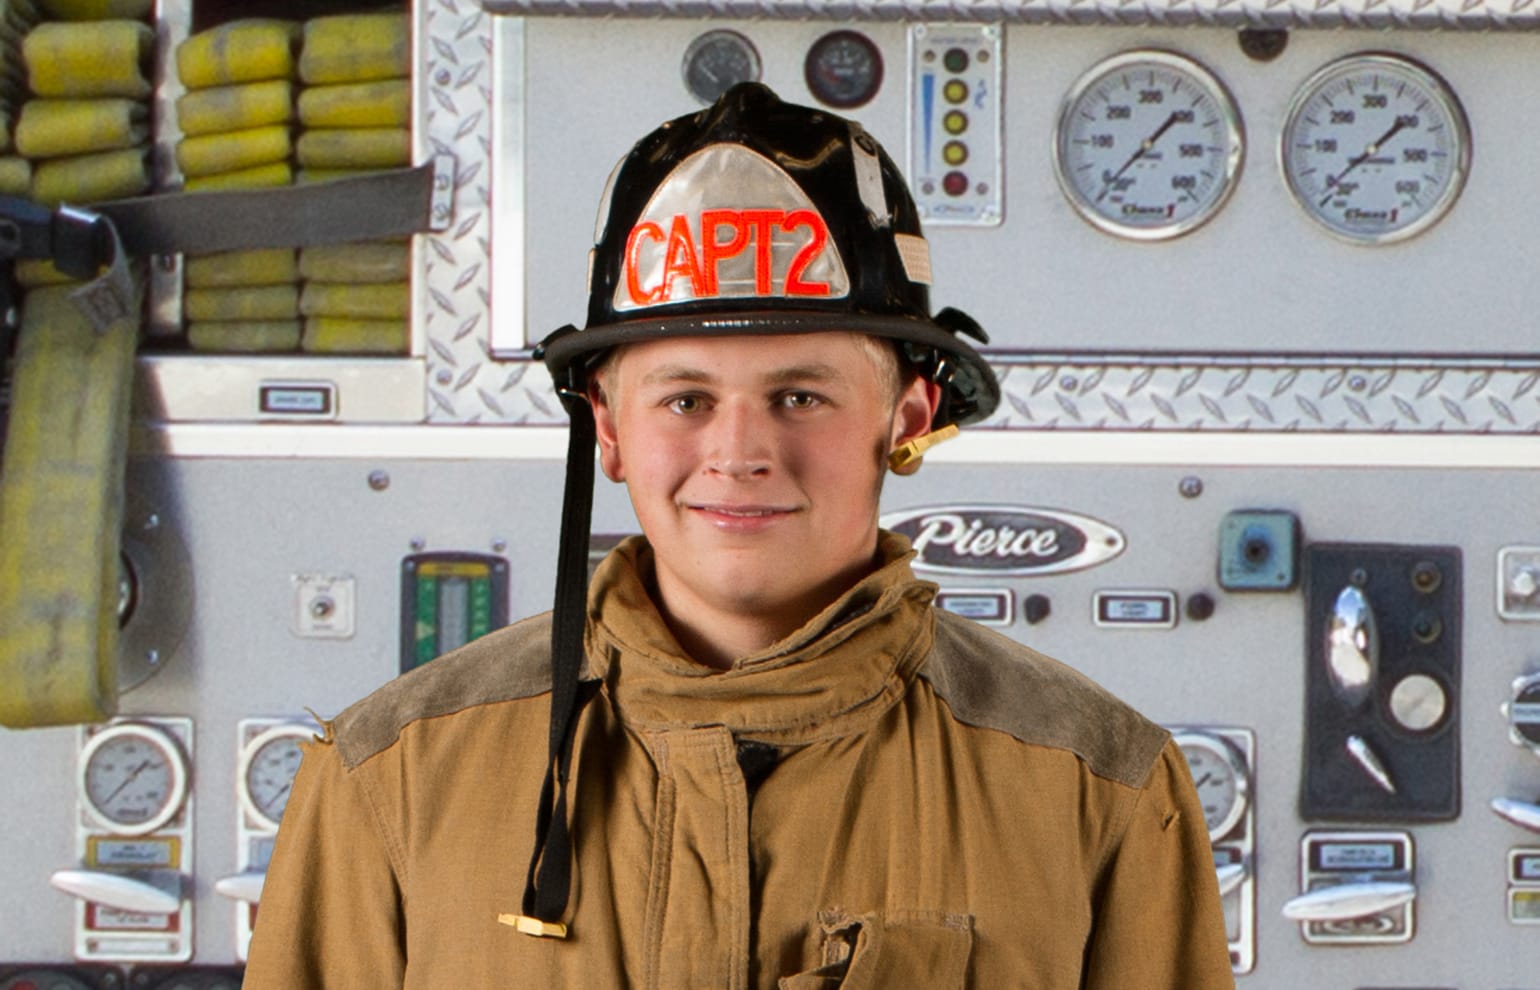 Cameron Kewitz, an 18-year-old Clark County Fire &amp; Rescue fire cadet from Woodland, died in a single-vehicle crash Monday in the Amboy area.